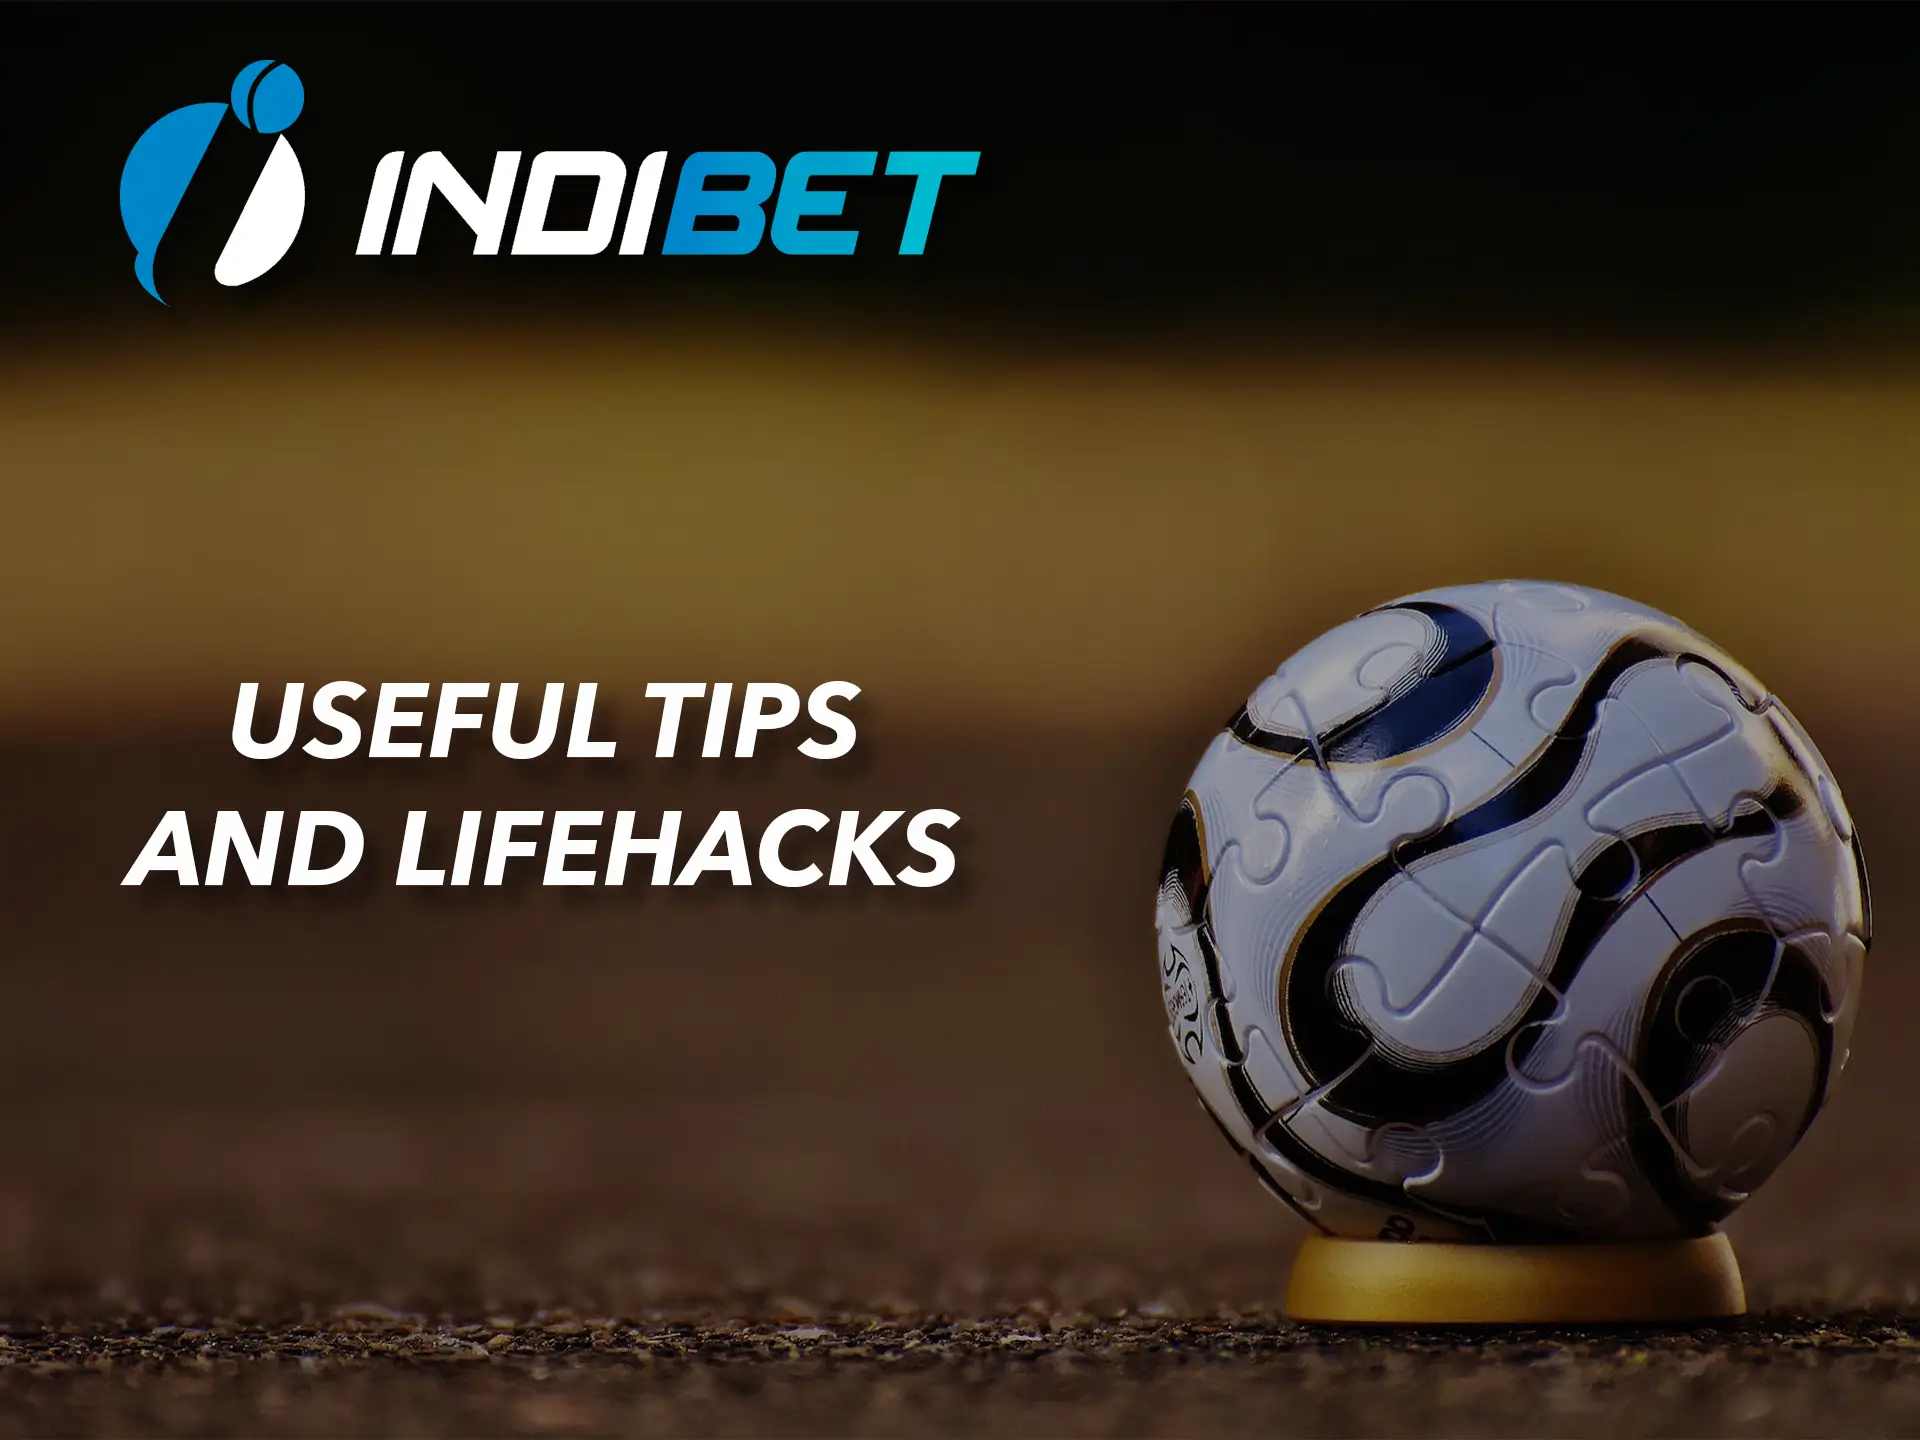 Apply your skills and experience when betting and gambling at Indibet.